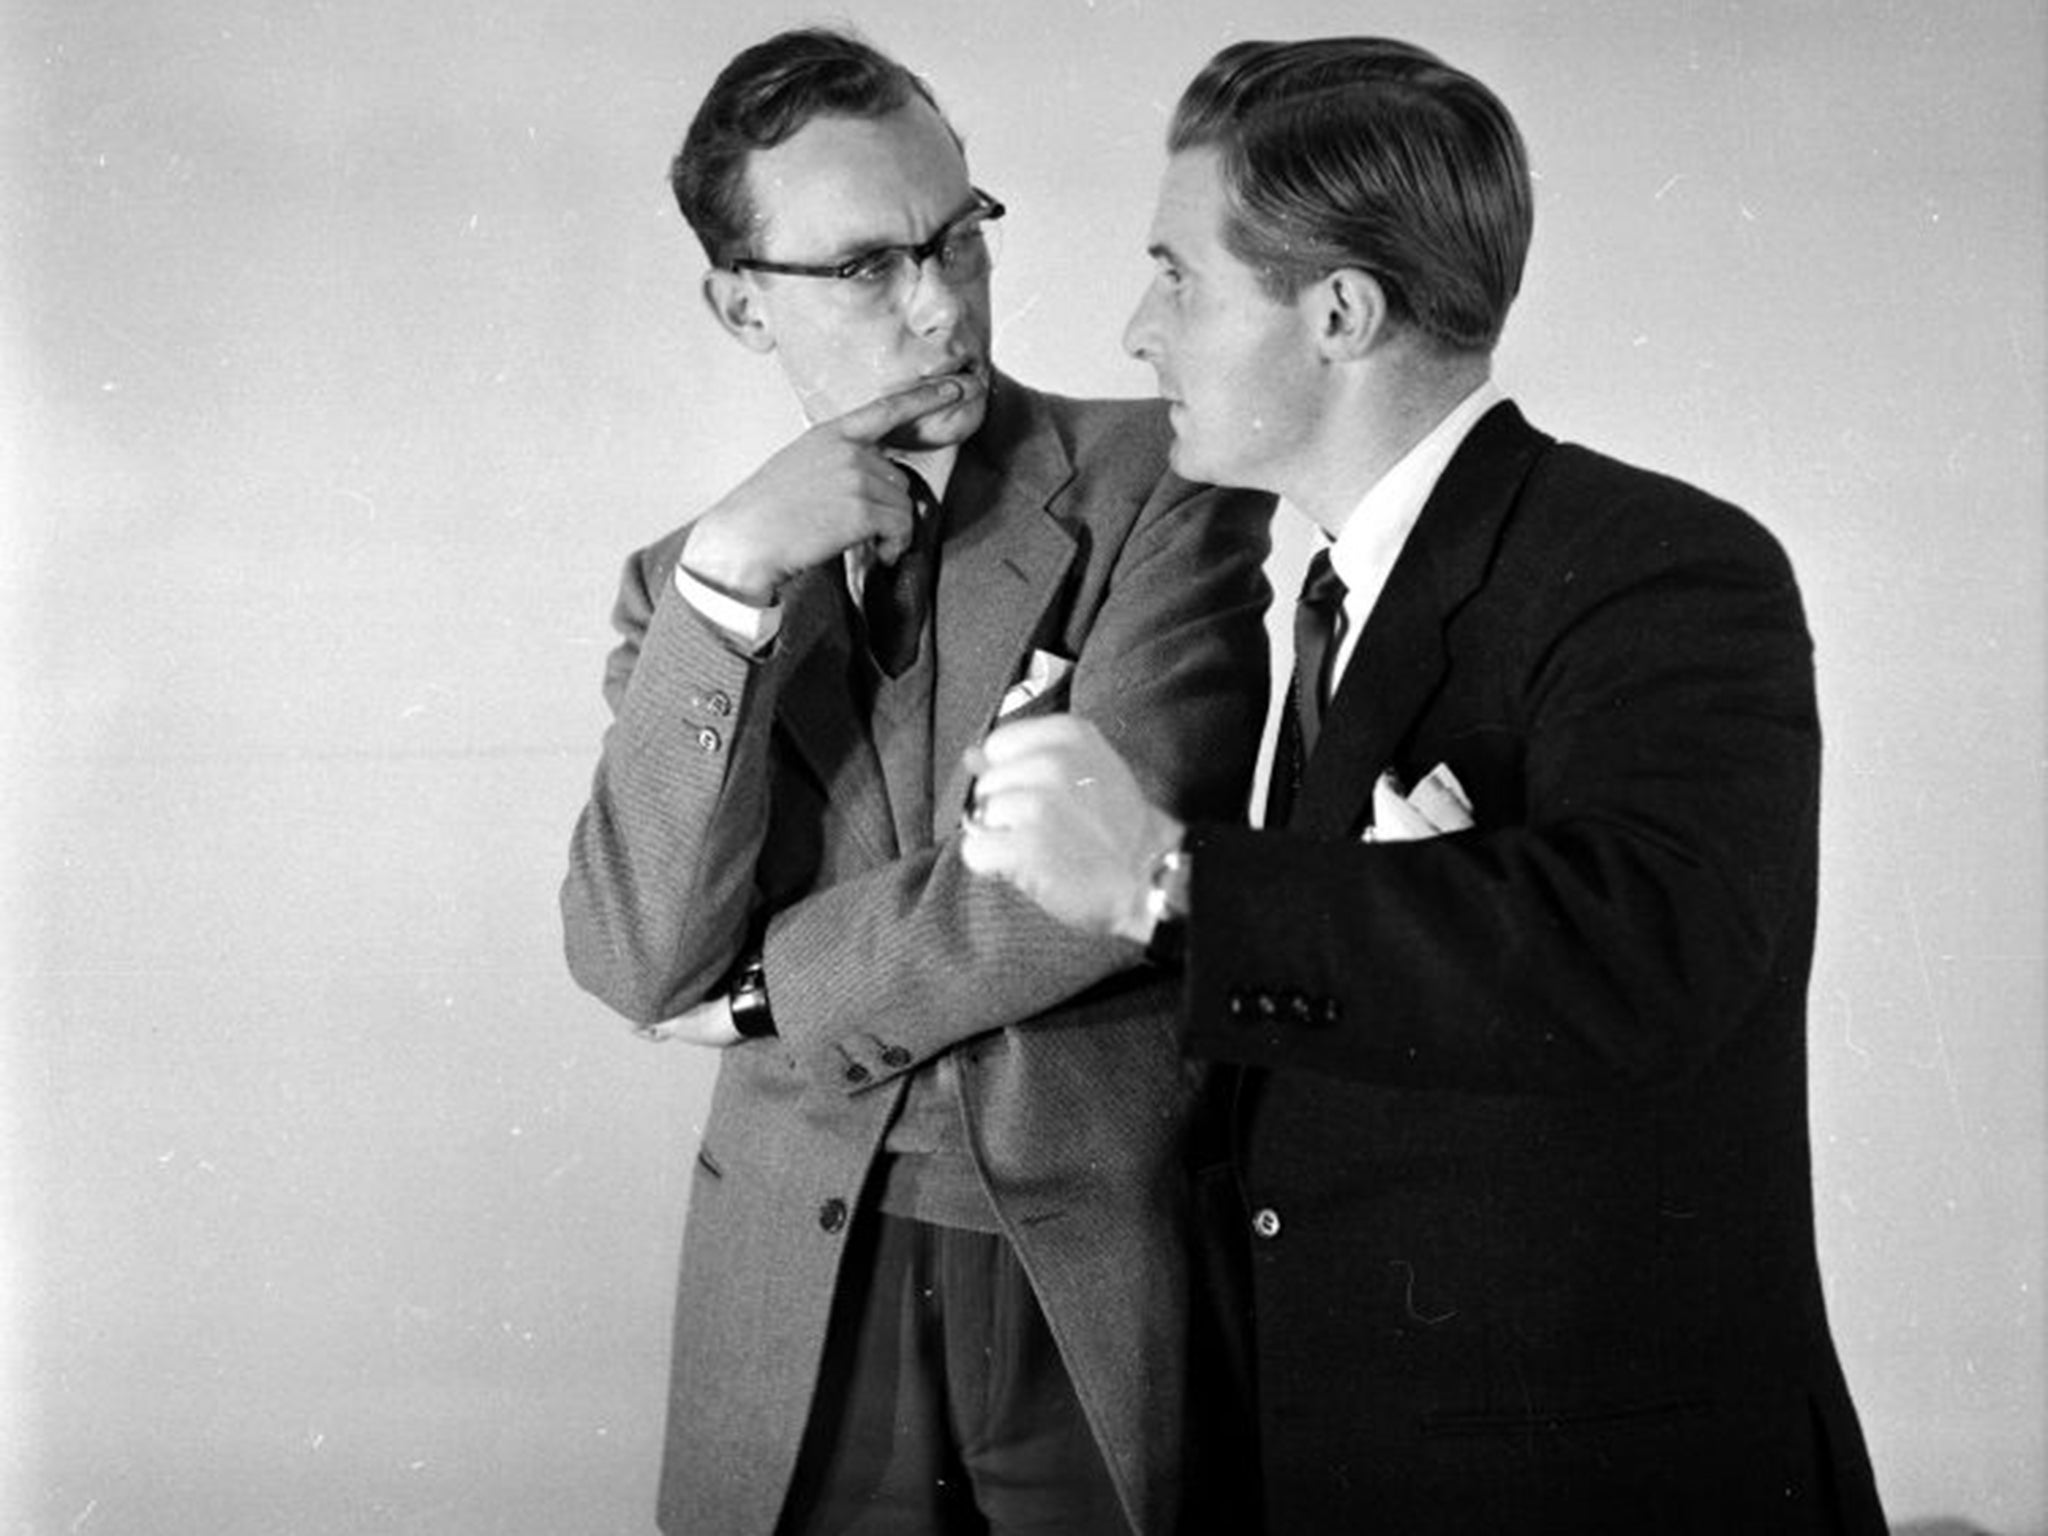 On their third visit to the Glasgow Empire in the early 1950s, Morecambe and Wise were received in complete silence